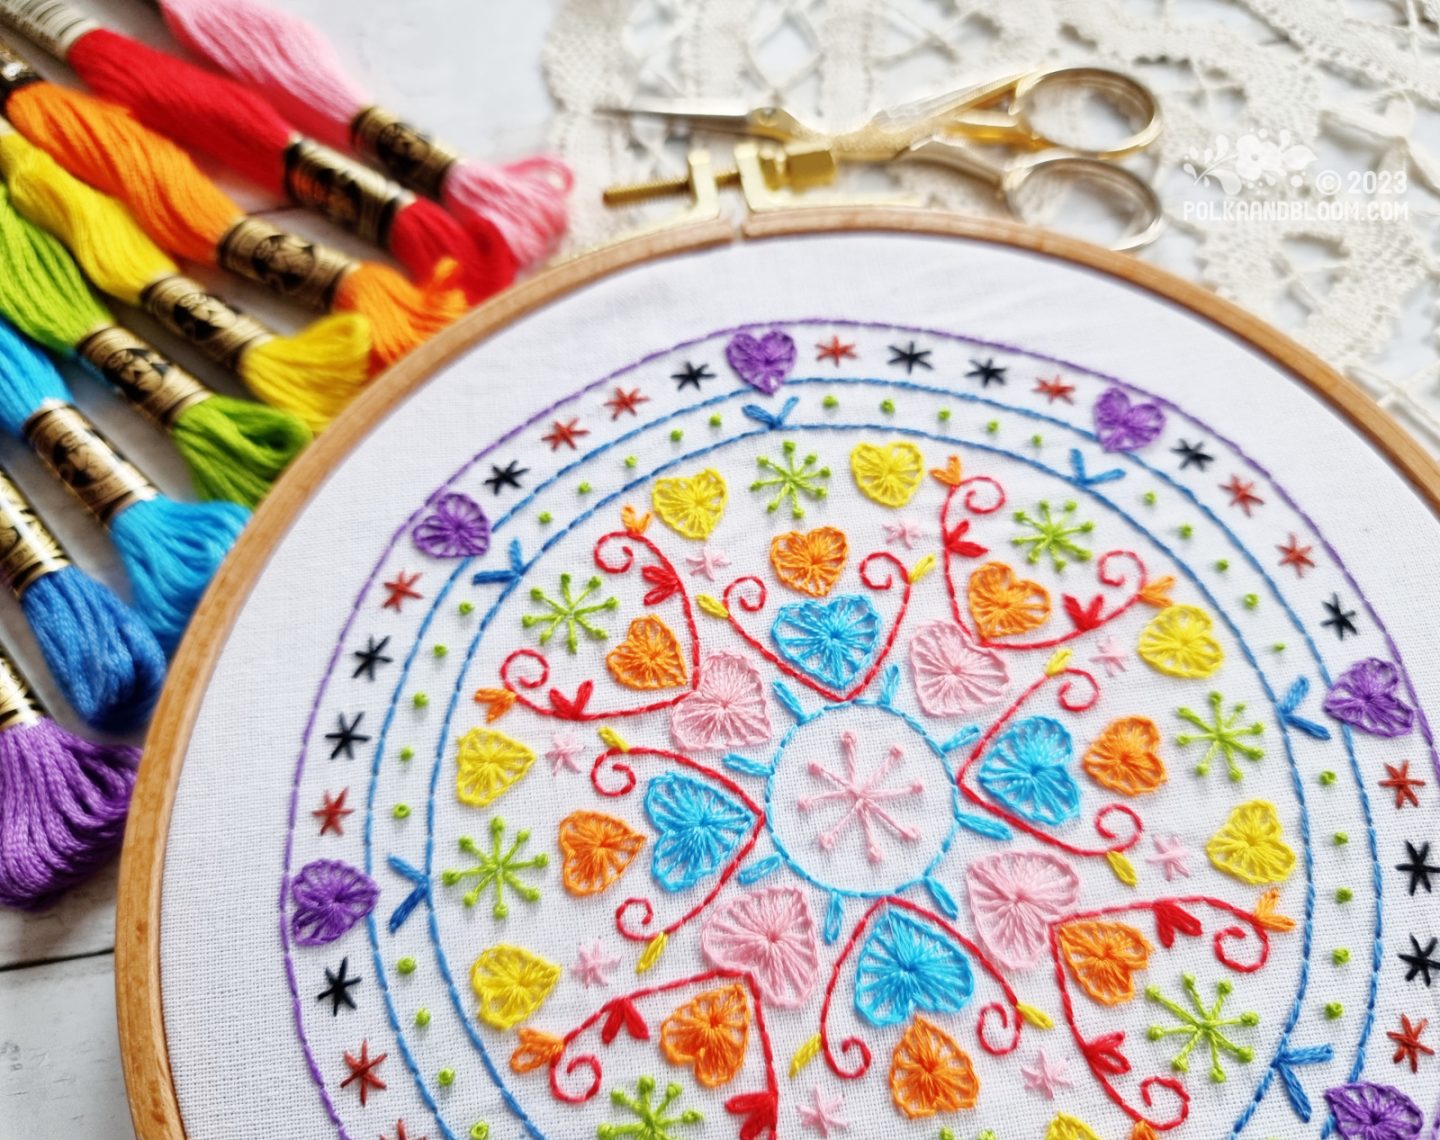 Partial view of an embroidery hoop with white fabric. On the fabric is embroidered a mandala inspired design with colours inspired by the Progress Pride flag.